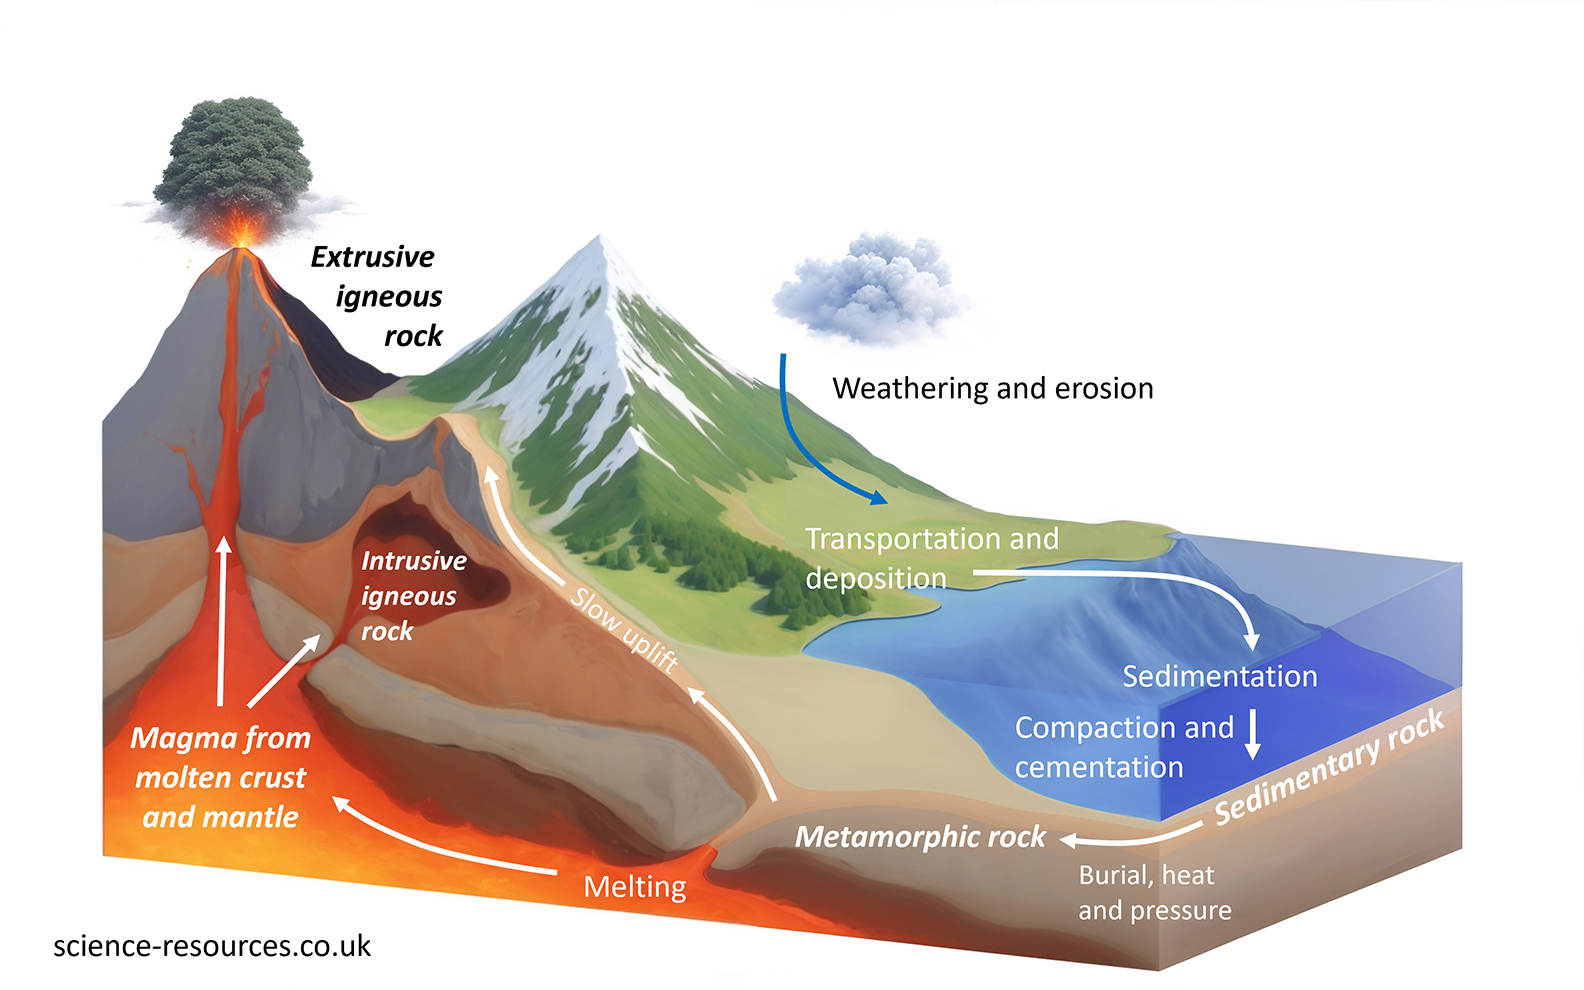 This image shows a diagram of the rock cycle, which is the process of how rocks change from one type to another over time. The diagram shows a cross-section of a landscape with a mountain, underground layers, and a water body. It also shows different types of rocks (igneous, sedimentary, and metamorphic) and the geological processes (melting, weathering, erosion, etc.) that transform them.